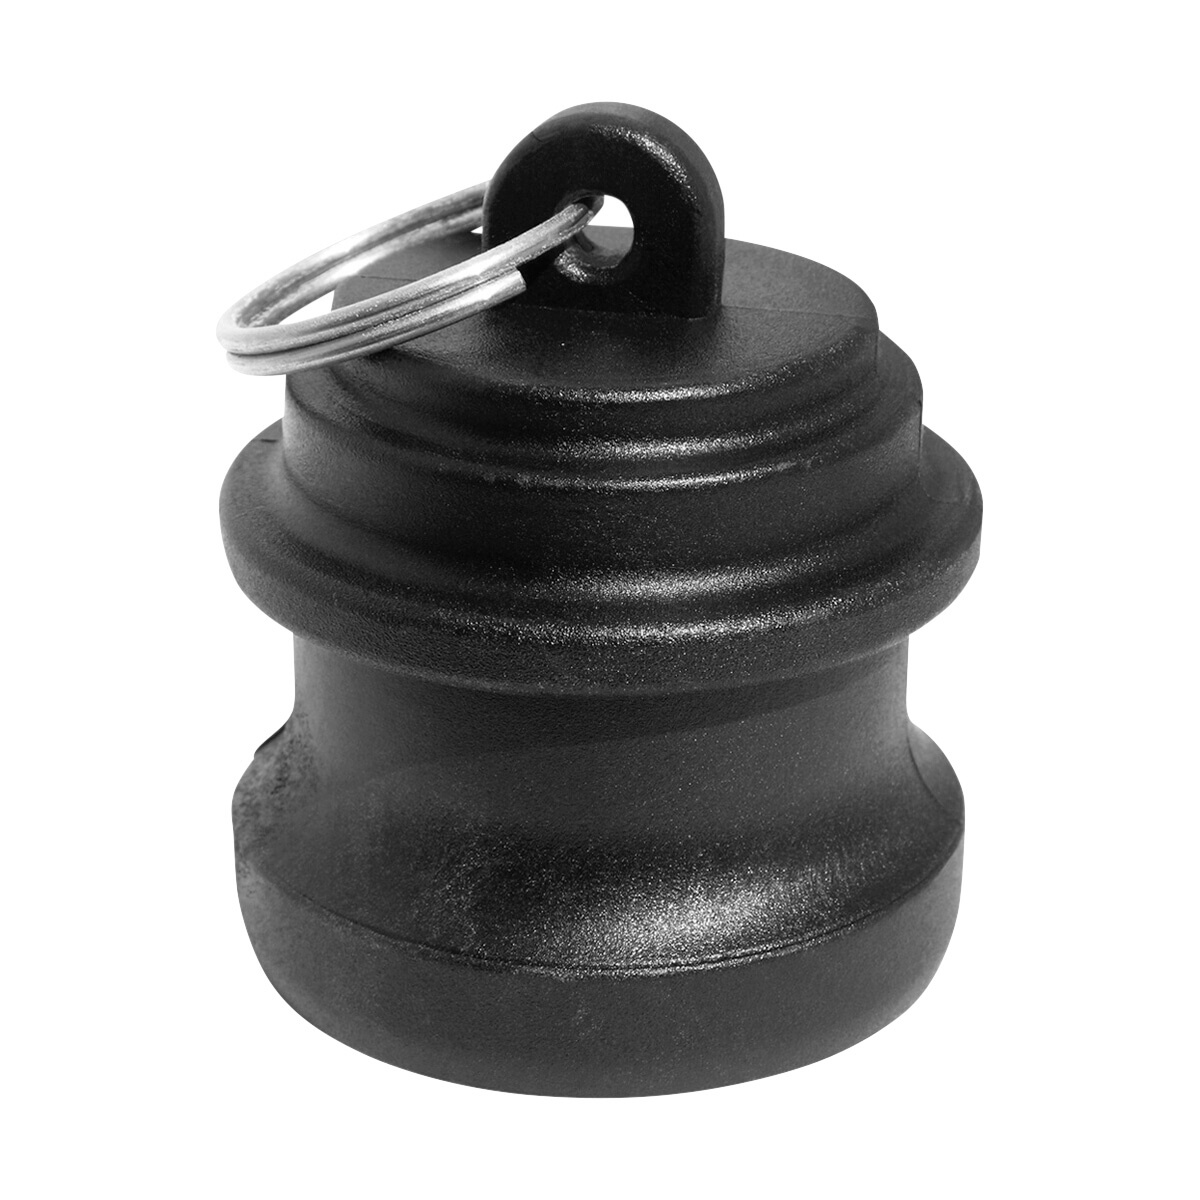 Camlock Plug for Female Coupler - 2-in